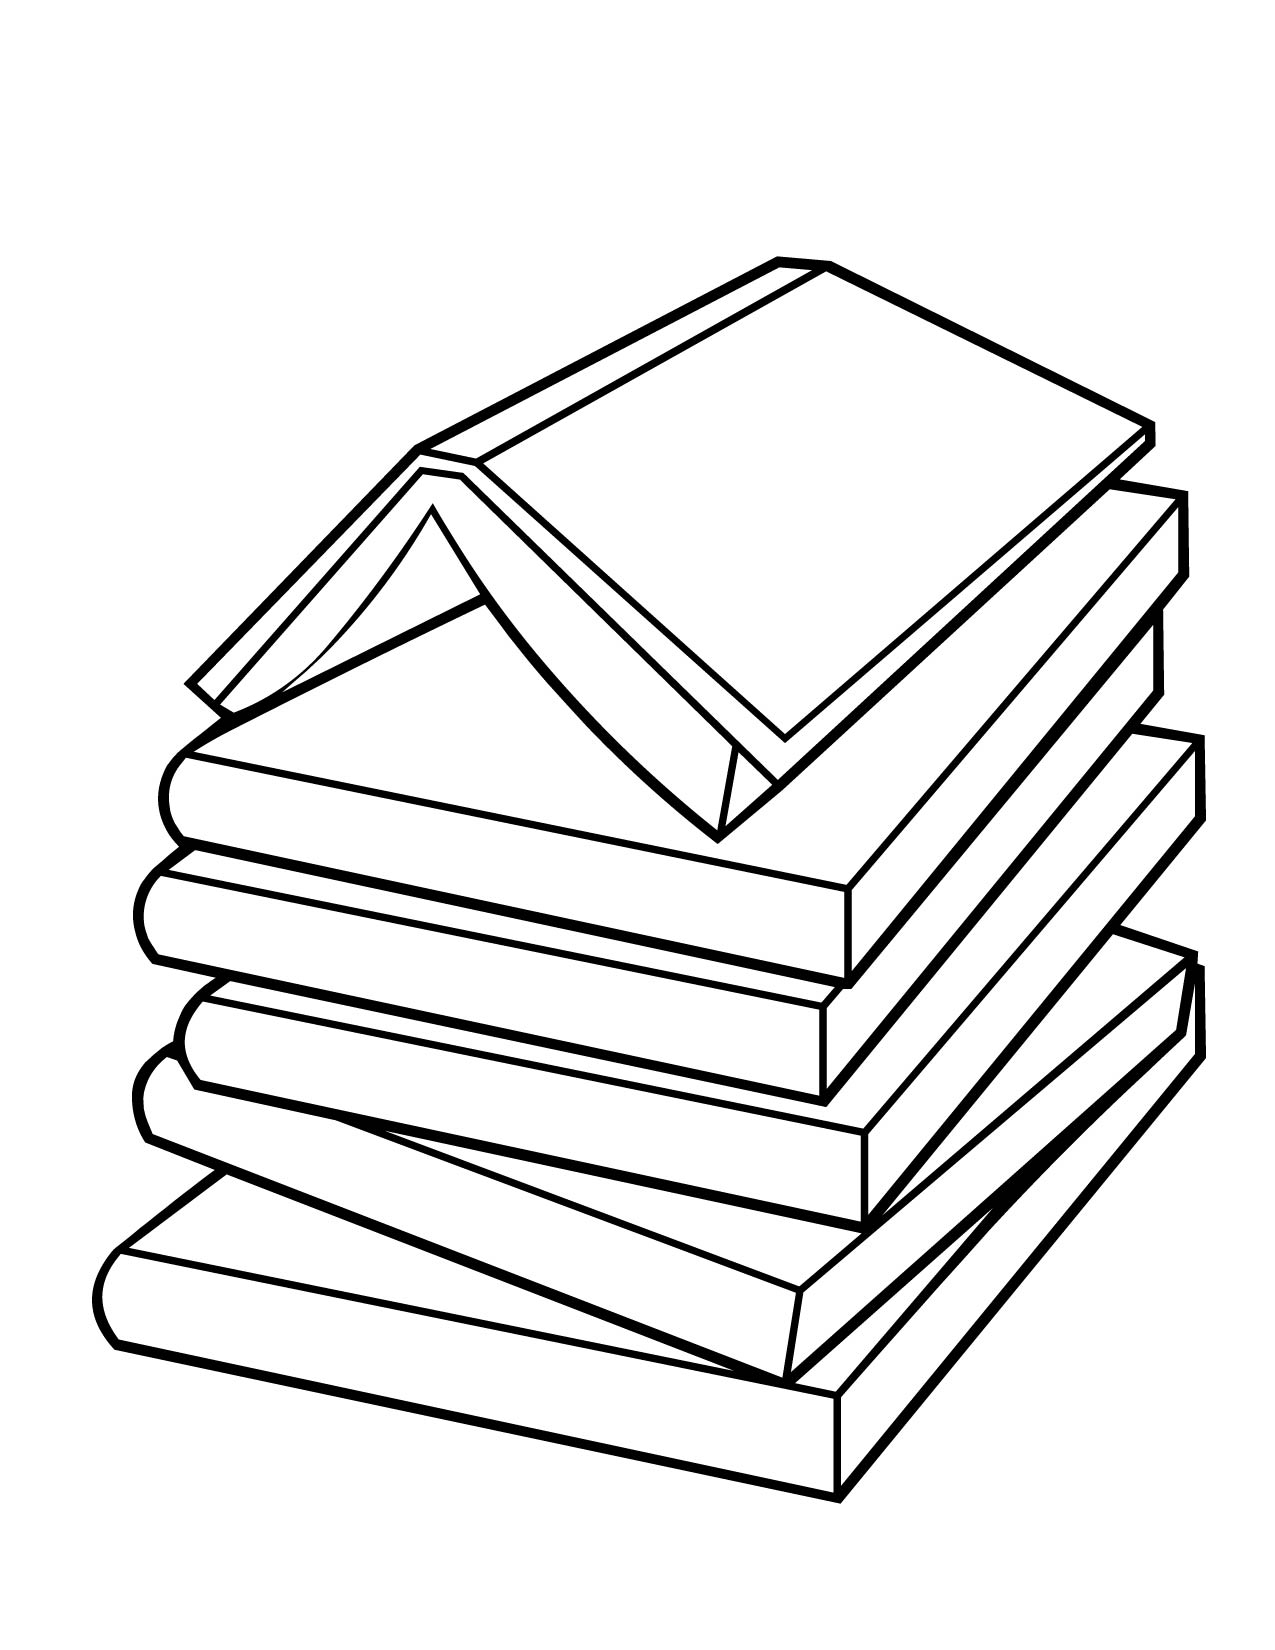  Childrens Books coloring pages | Colouring pages | #4